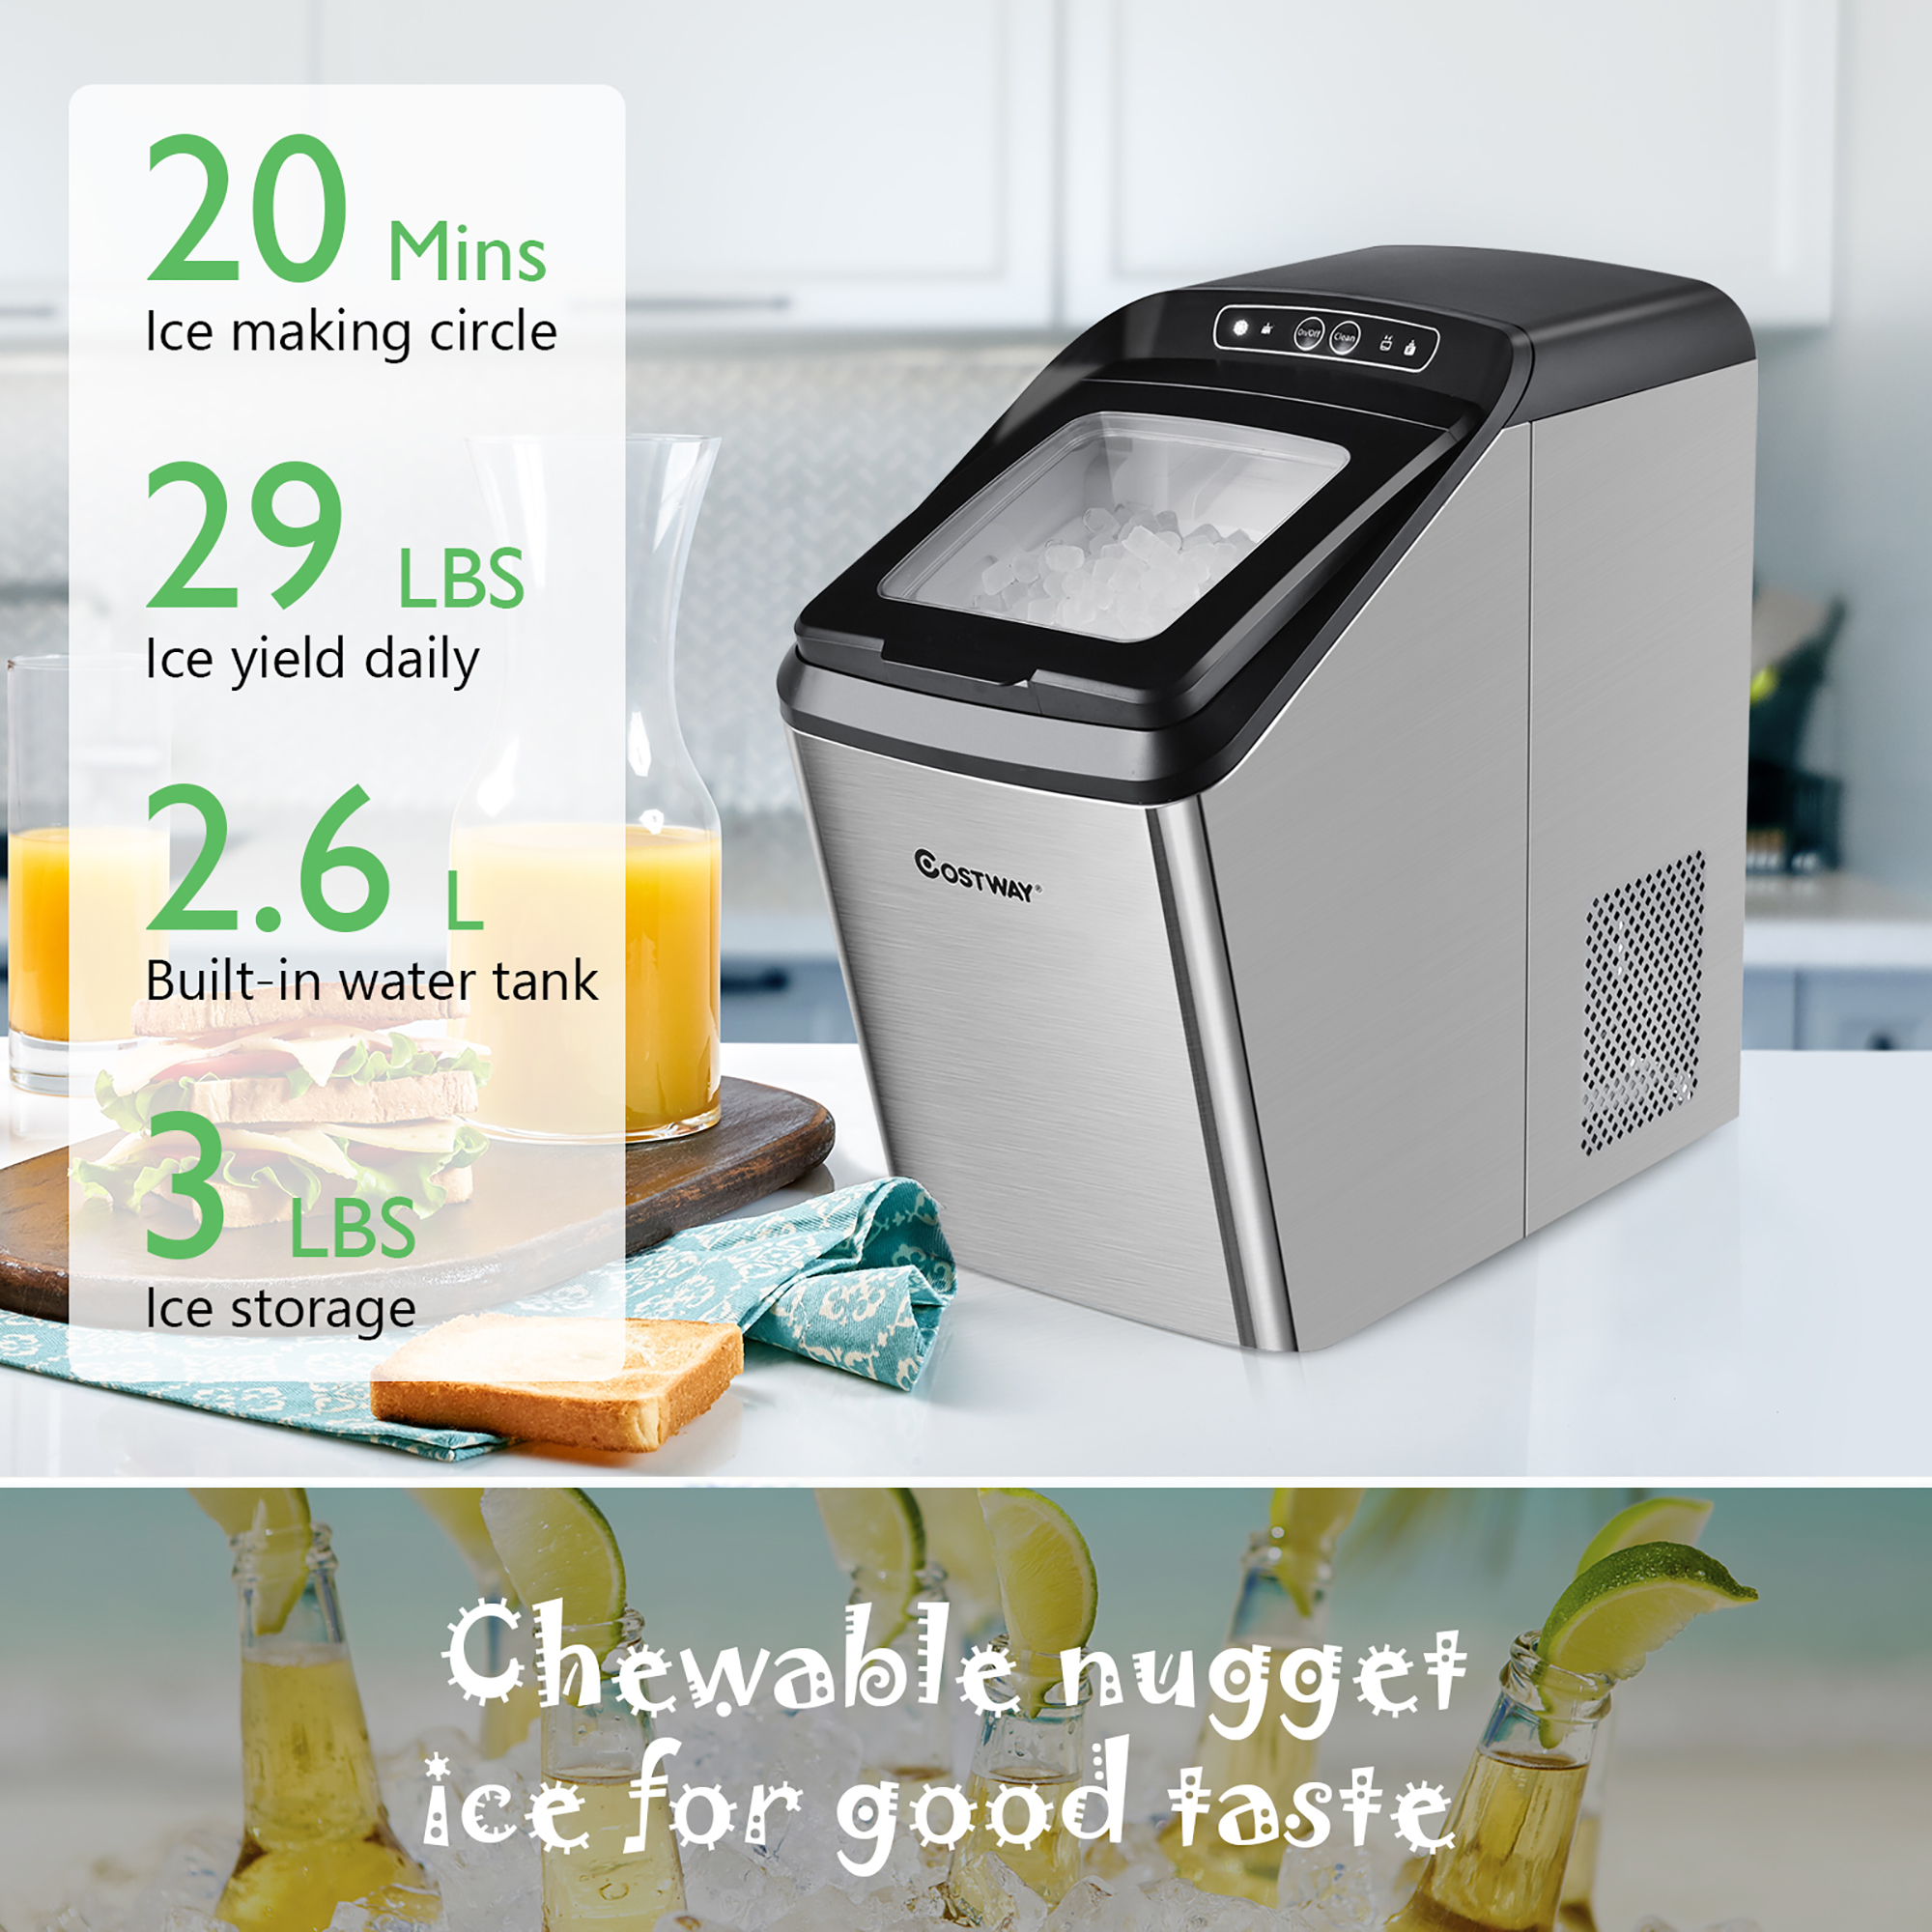 Costway Nugget Ice Maker Machine Countertop Chewable Ice Maker 29lb/Day Self-Cleaning